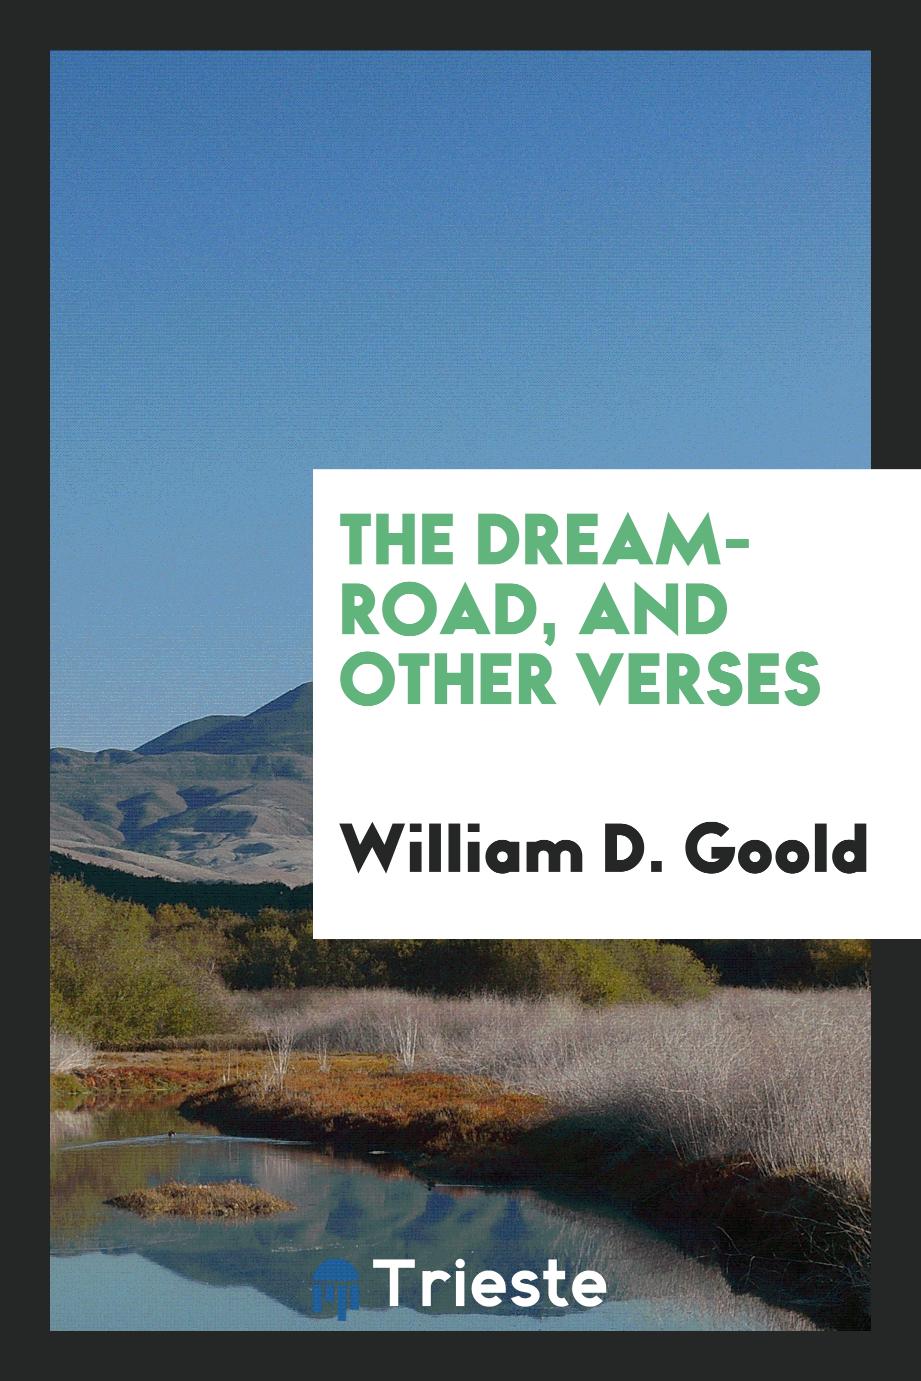 The Dream-Road, and Other Verses